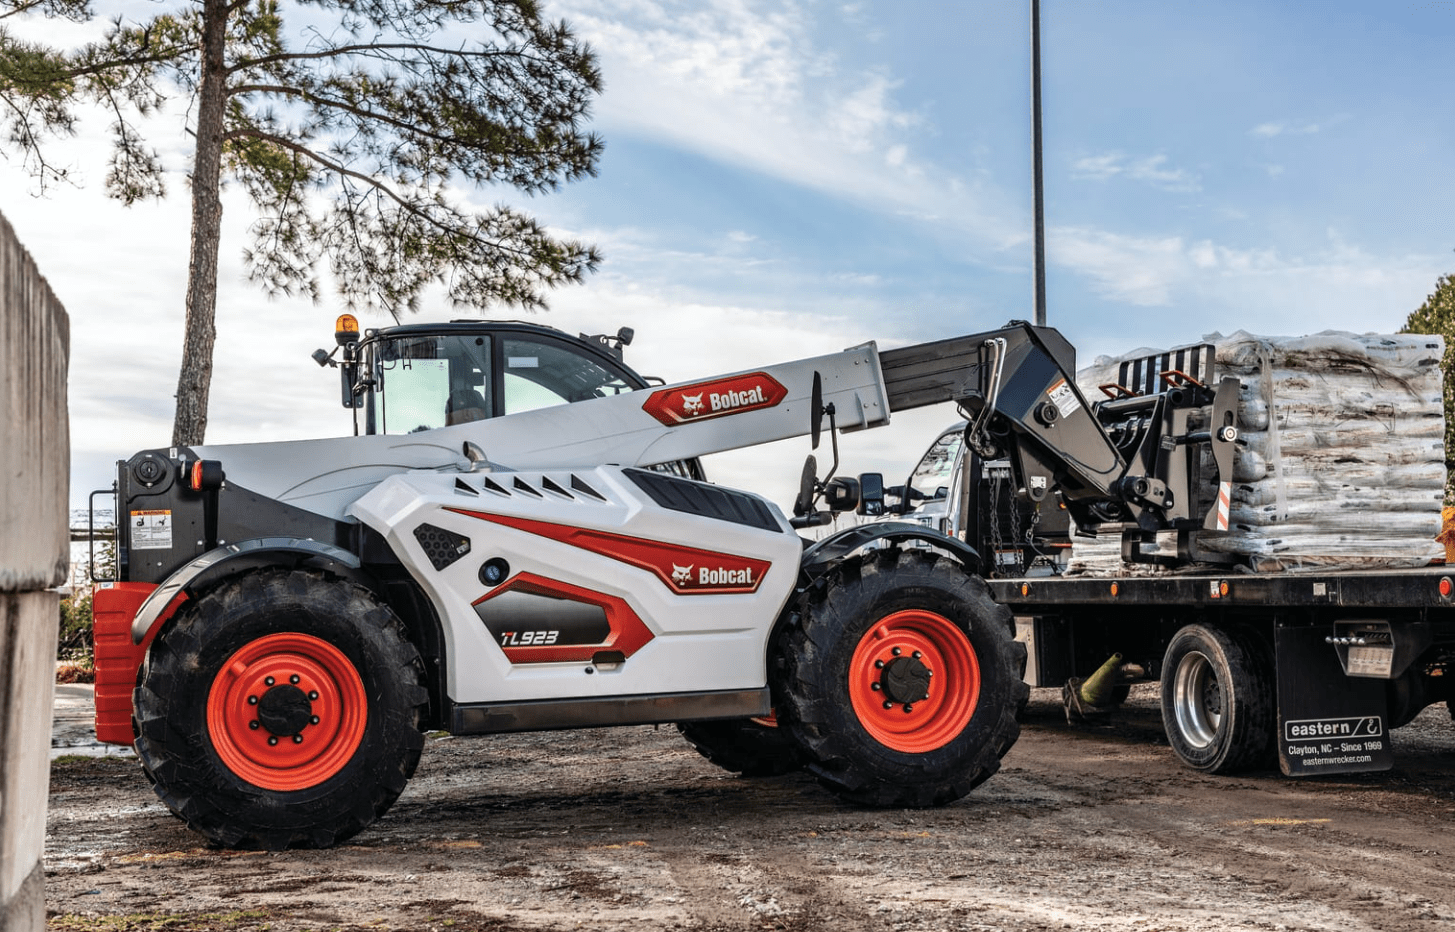 Browse Specs and more for the Bobcat TL923 Telehandler - Bobcat of North Texas